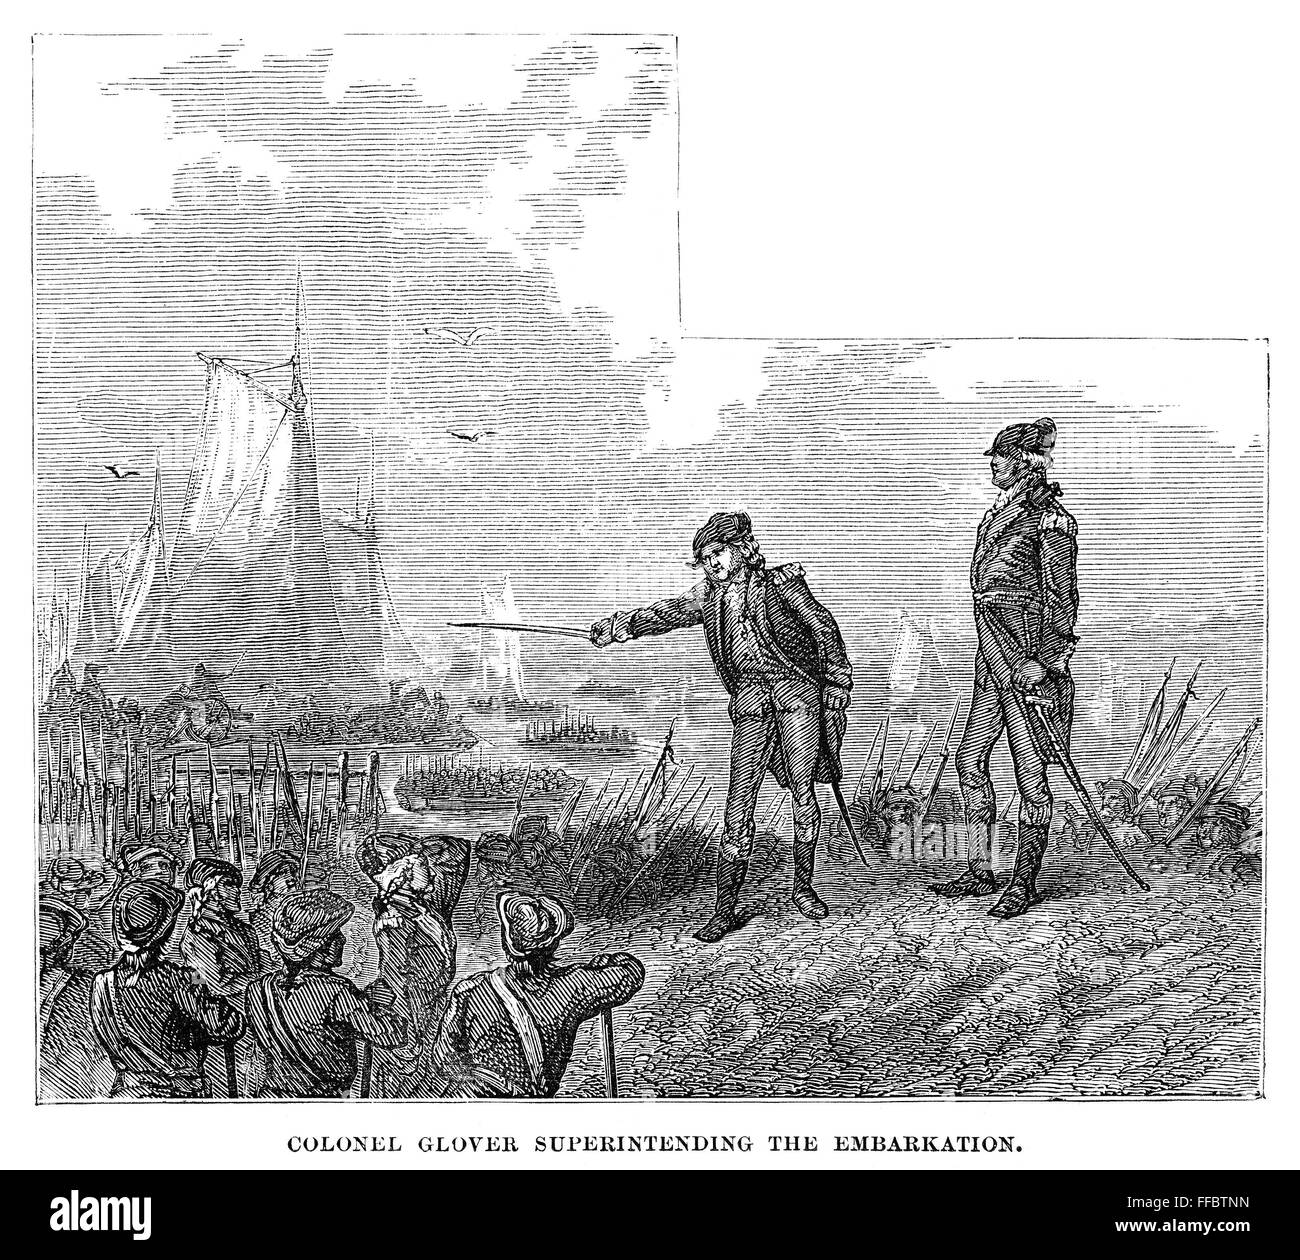 BATTLE OF LONG ISLAND, 1776. /nColonel John Glover of the Marblehead militia superintending the retreat of Continental Army troops across the East River to Manhattan on the night of 29-30 August 1776, following their defeat by the British in the Battle of Stock Photo